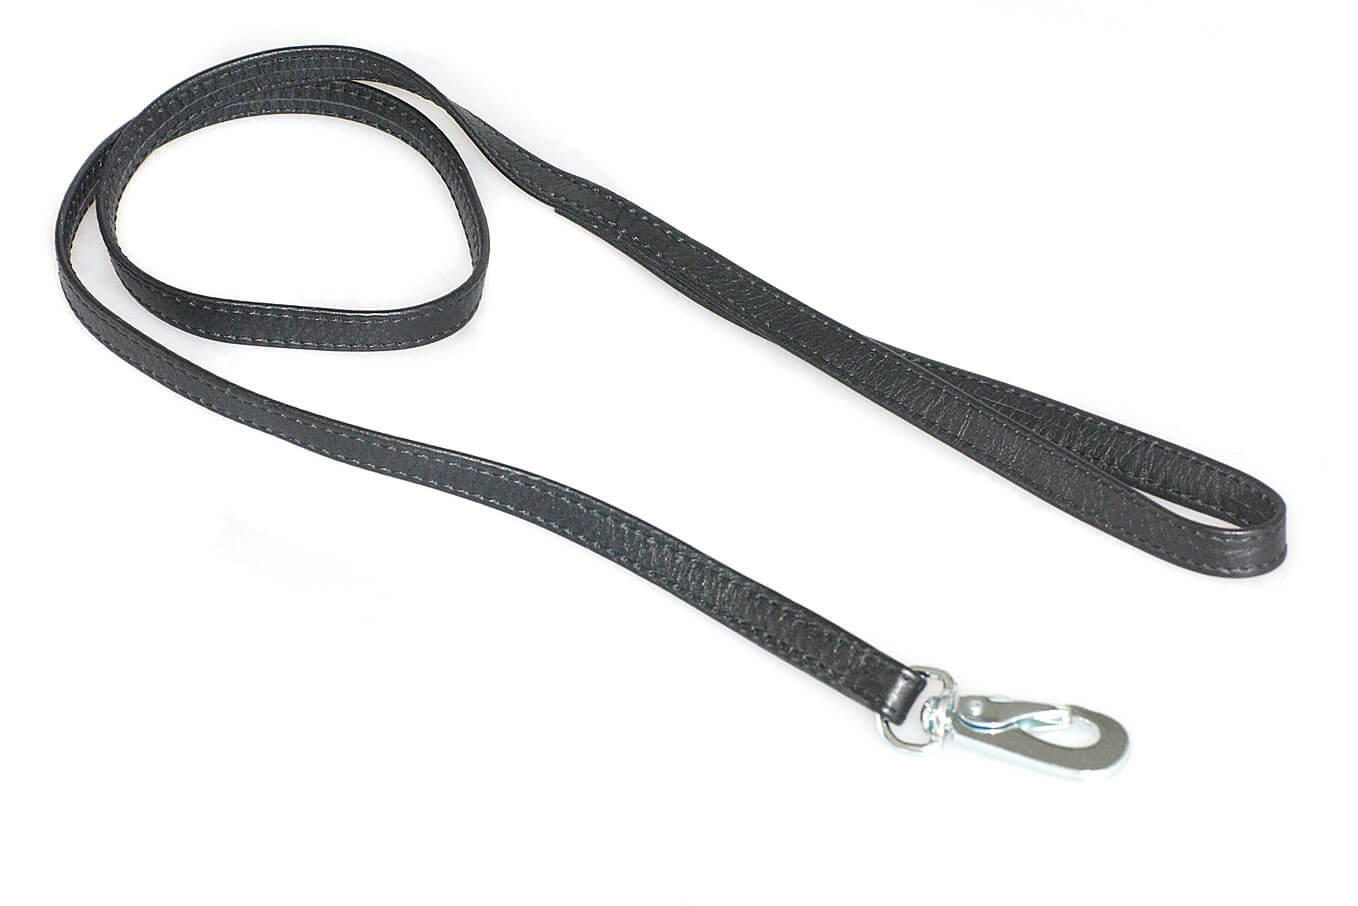 Black nappa leather double folded stitched dog lead 1.5m / 5ft